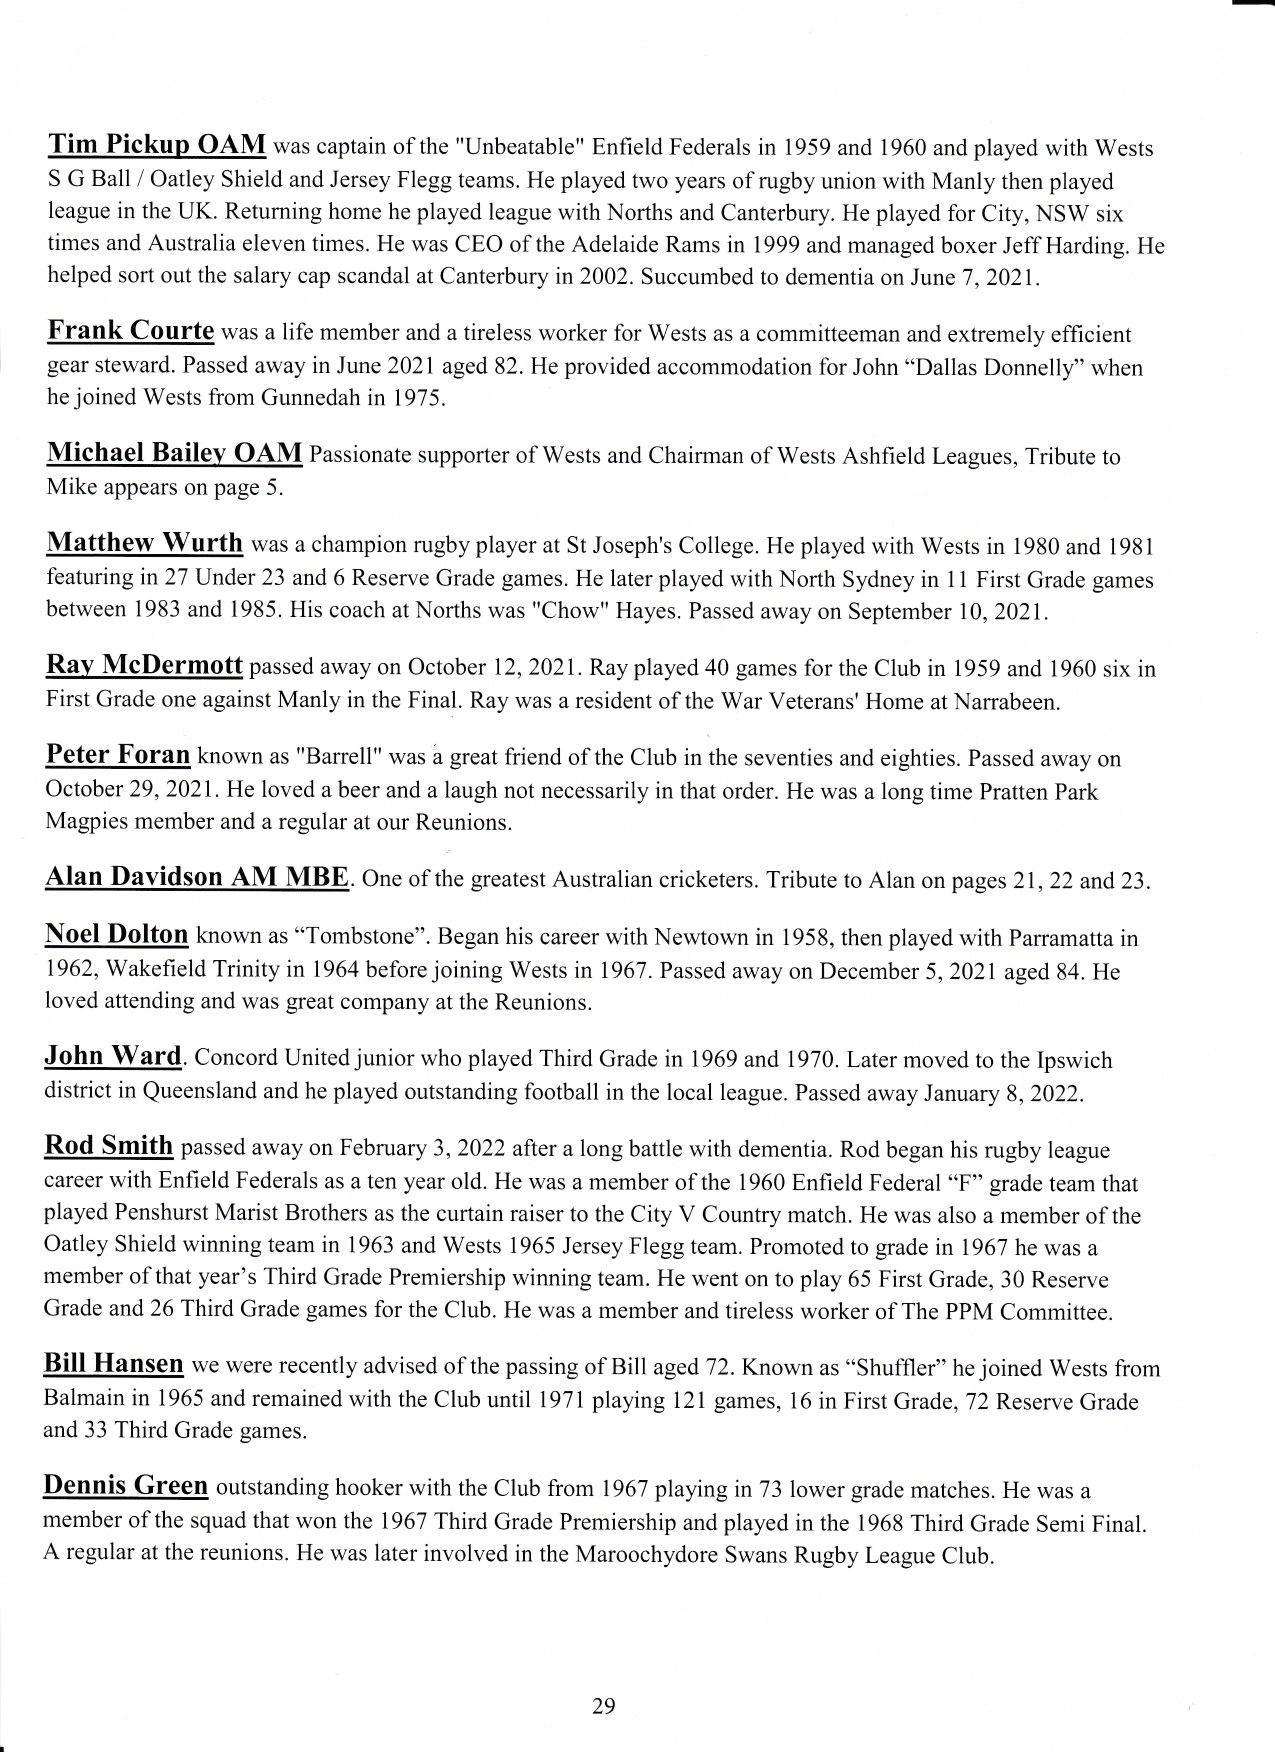 obituaries page 2